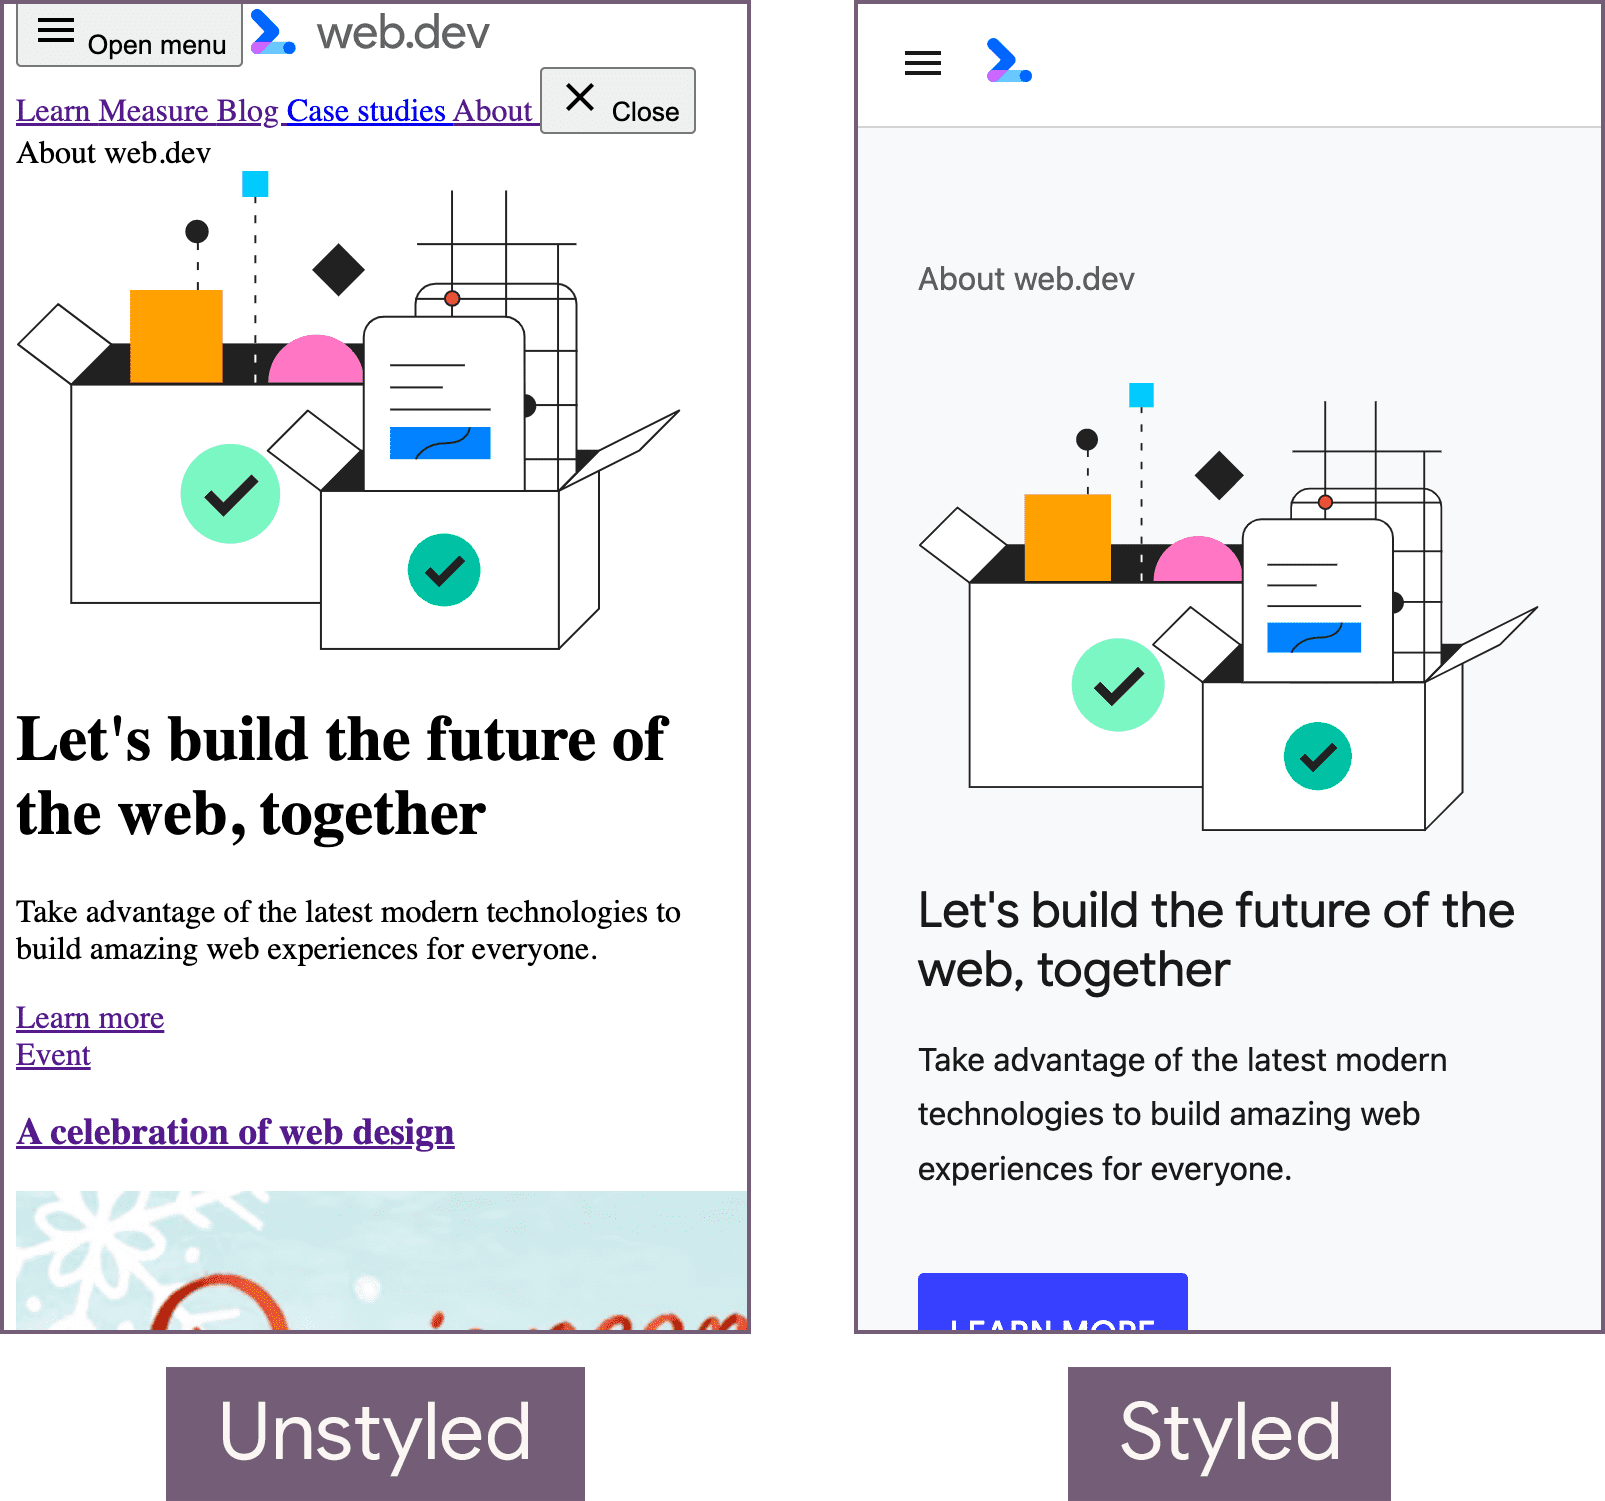 The web.dev home page in an unstyled state (left) and the styled state (right).